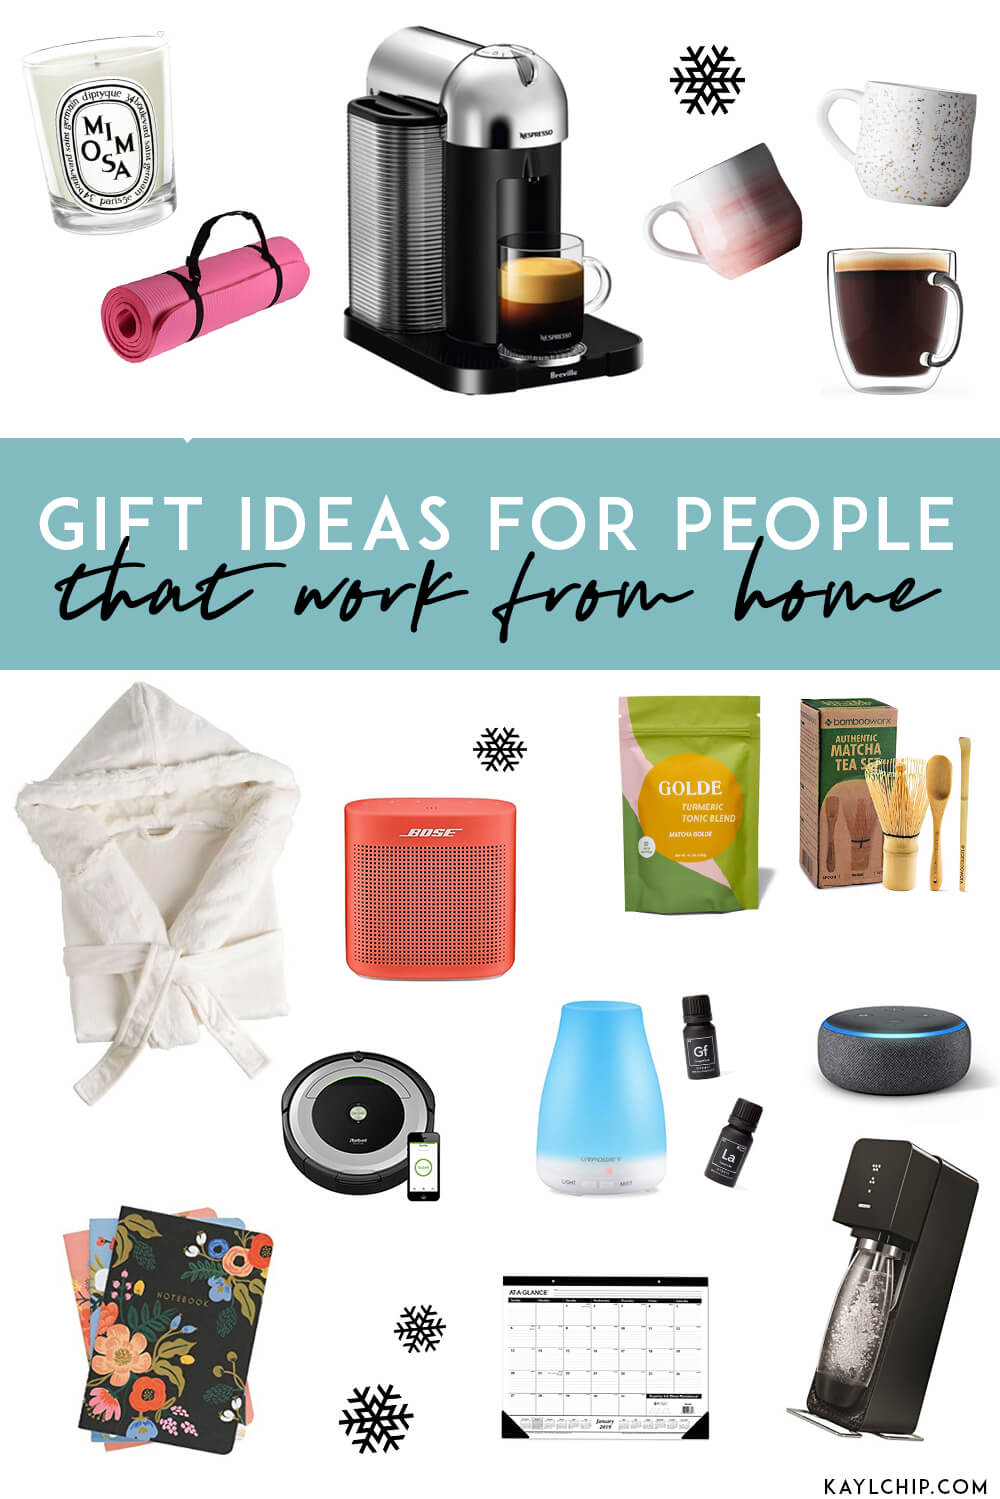 Gifts for people that work from home